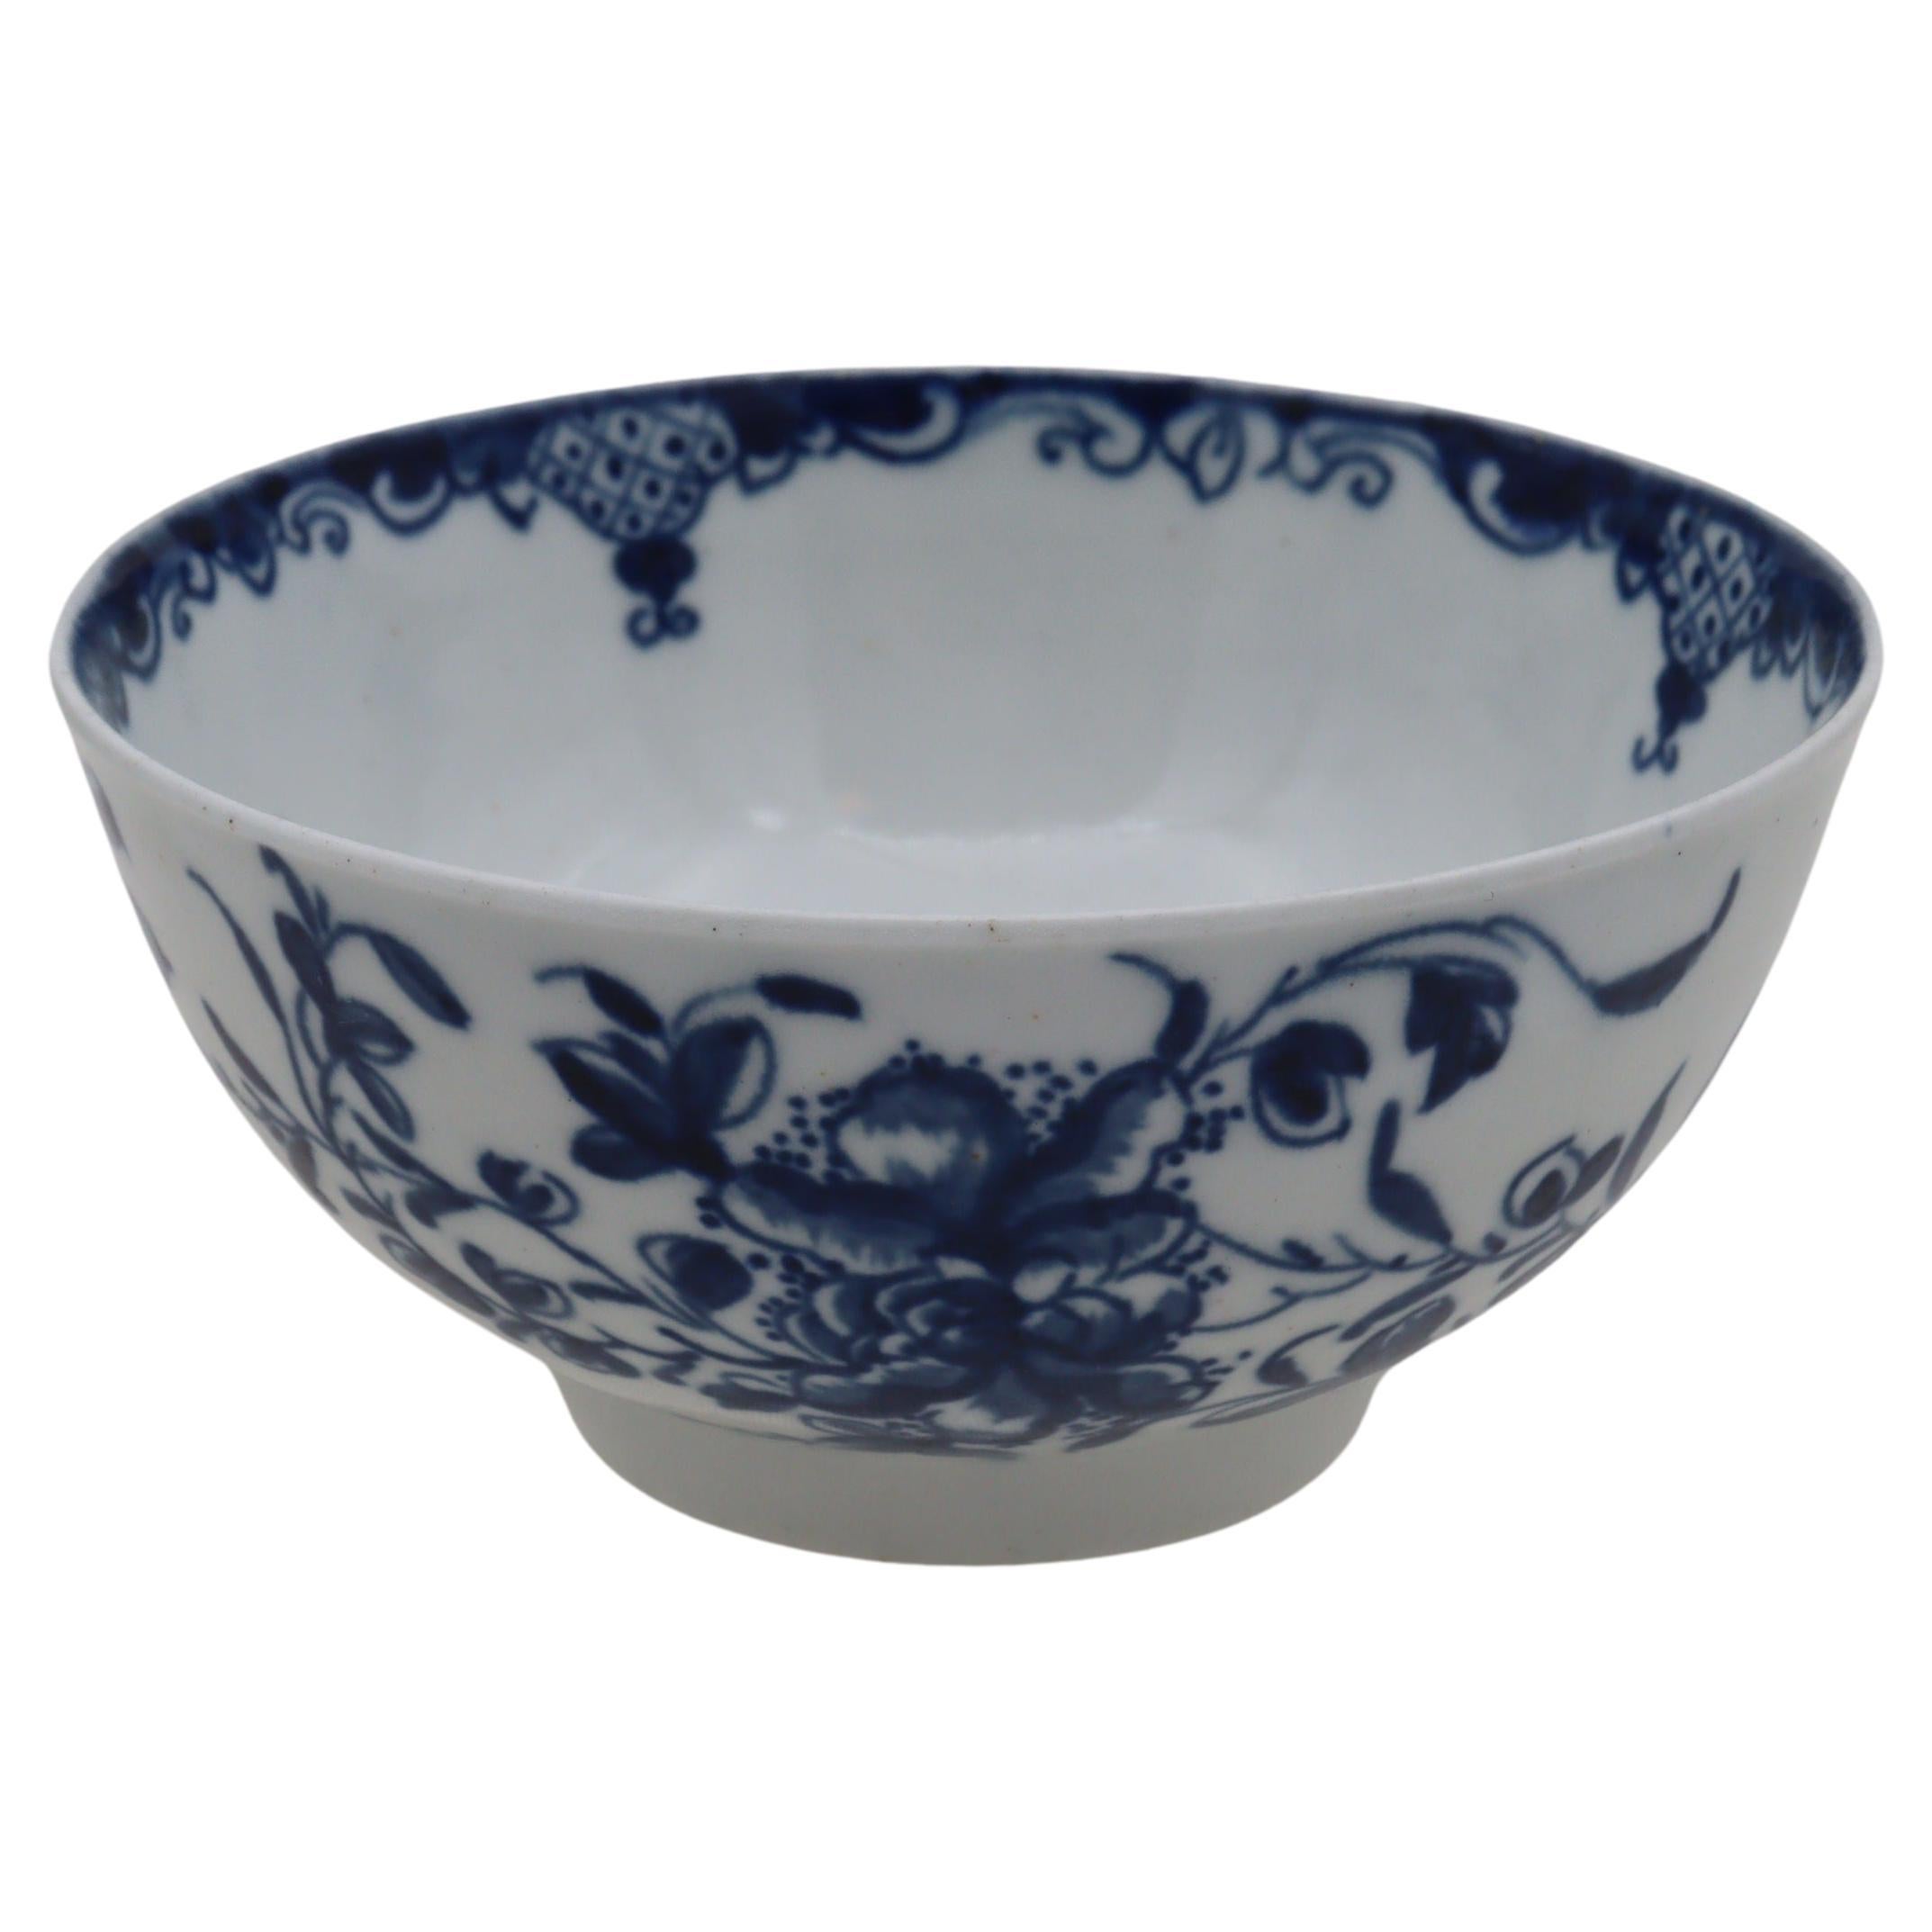 First period Worcester hand painted blue and white bowl Mansfield pattern. For Sale